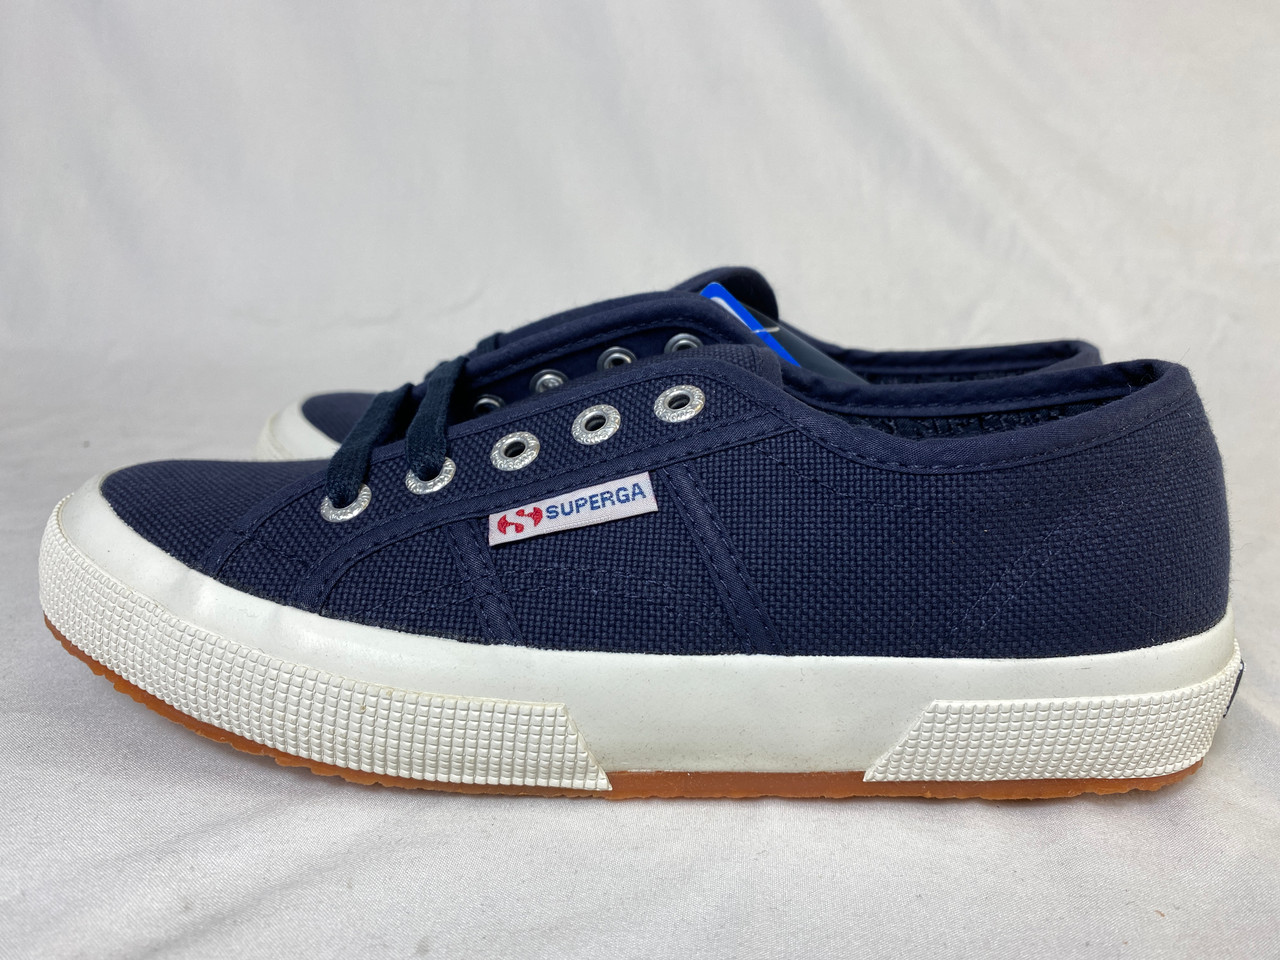 SUPERGA Tennis Shoes, Women's and Men's, Available in Two Colors and ...